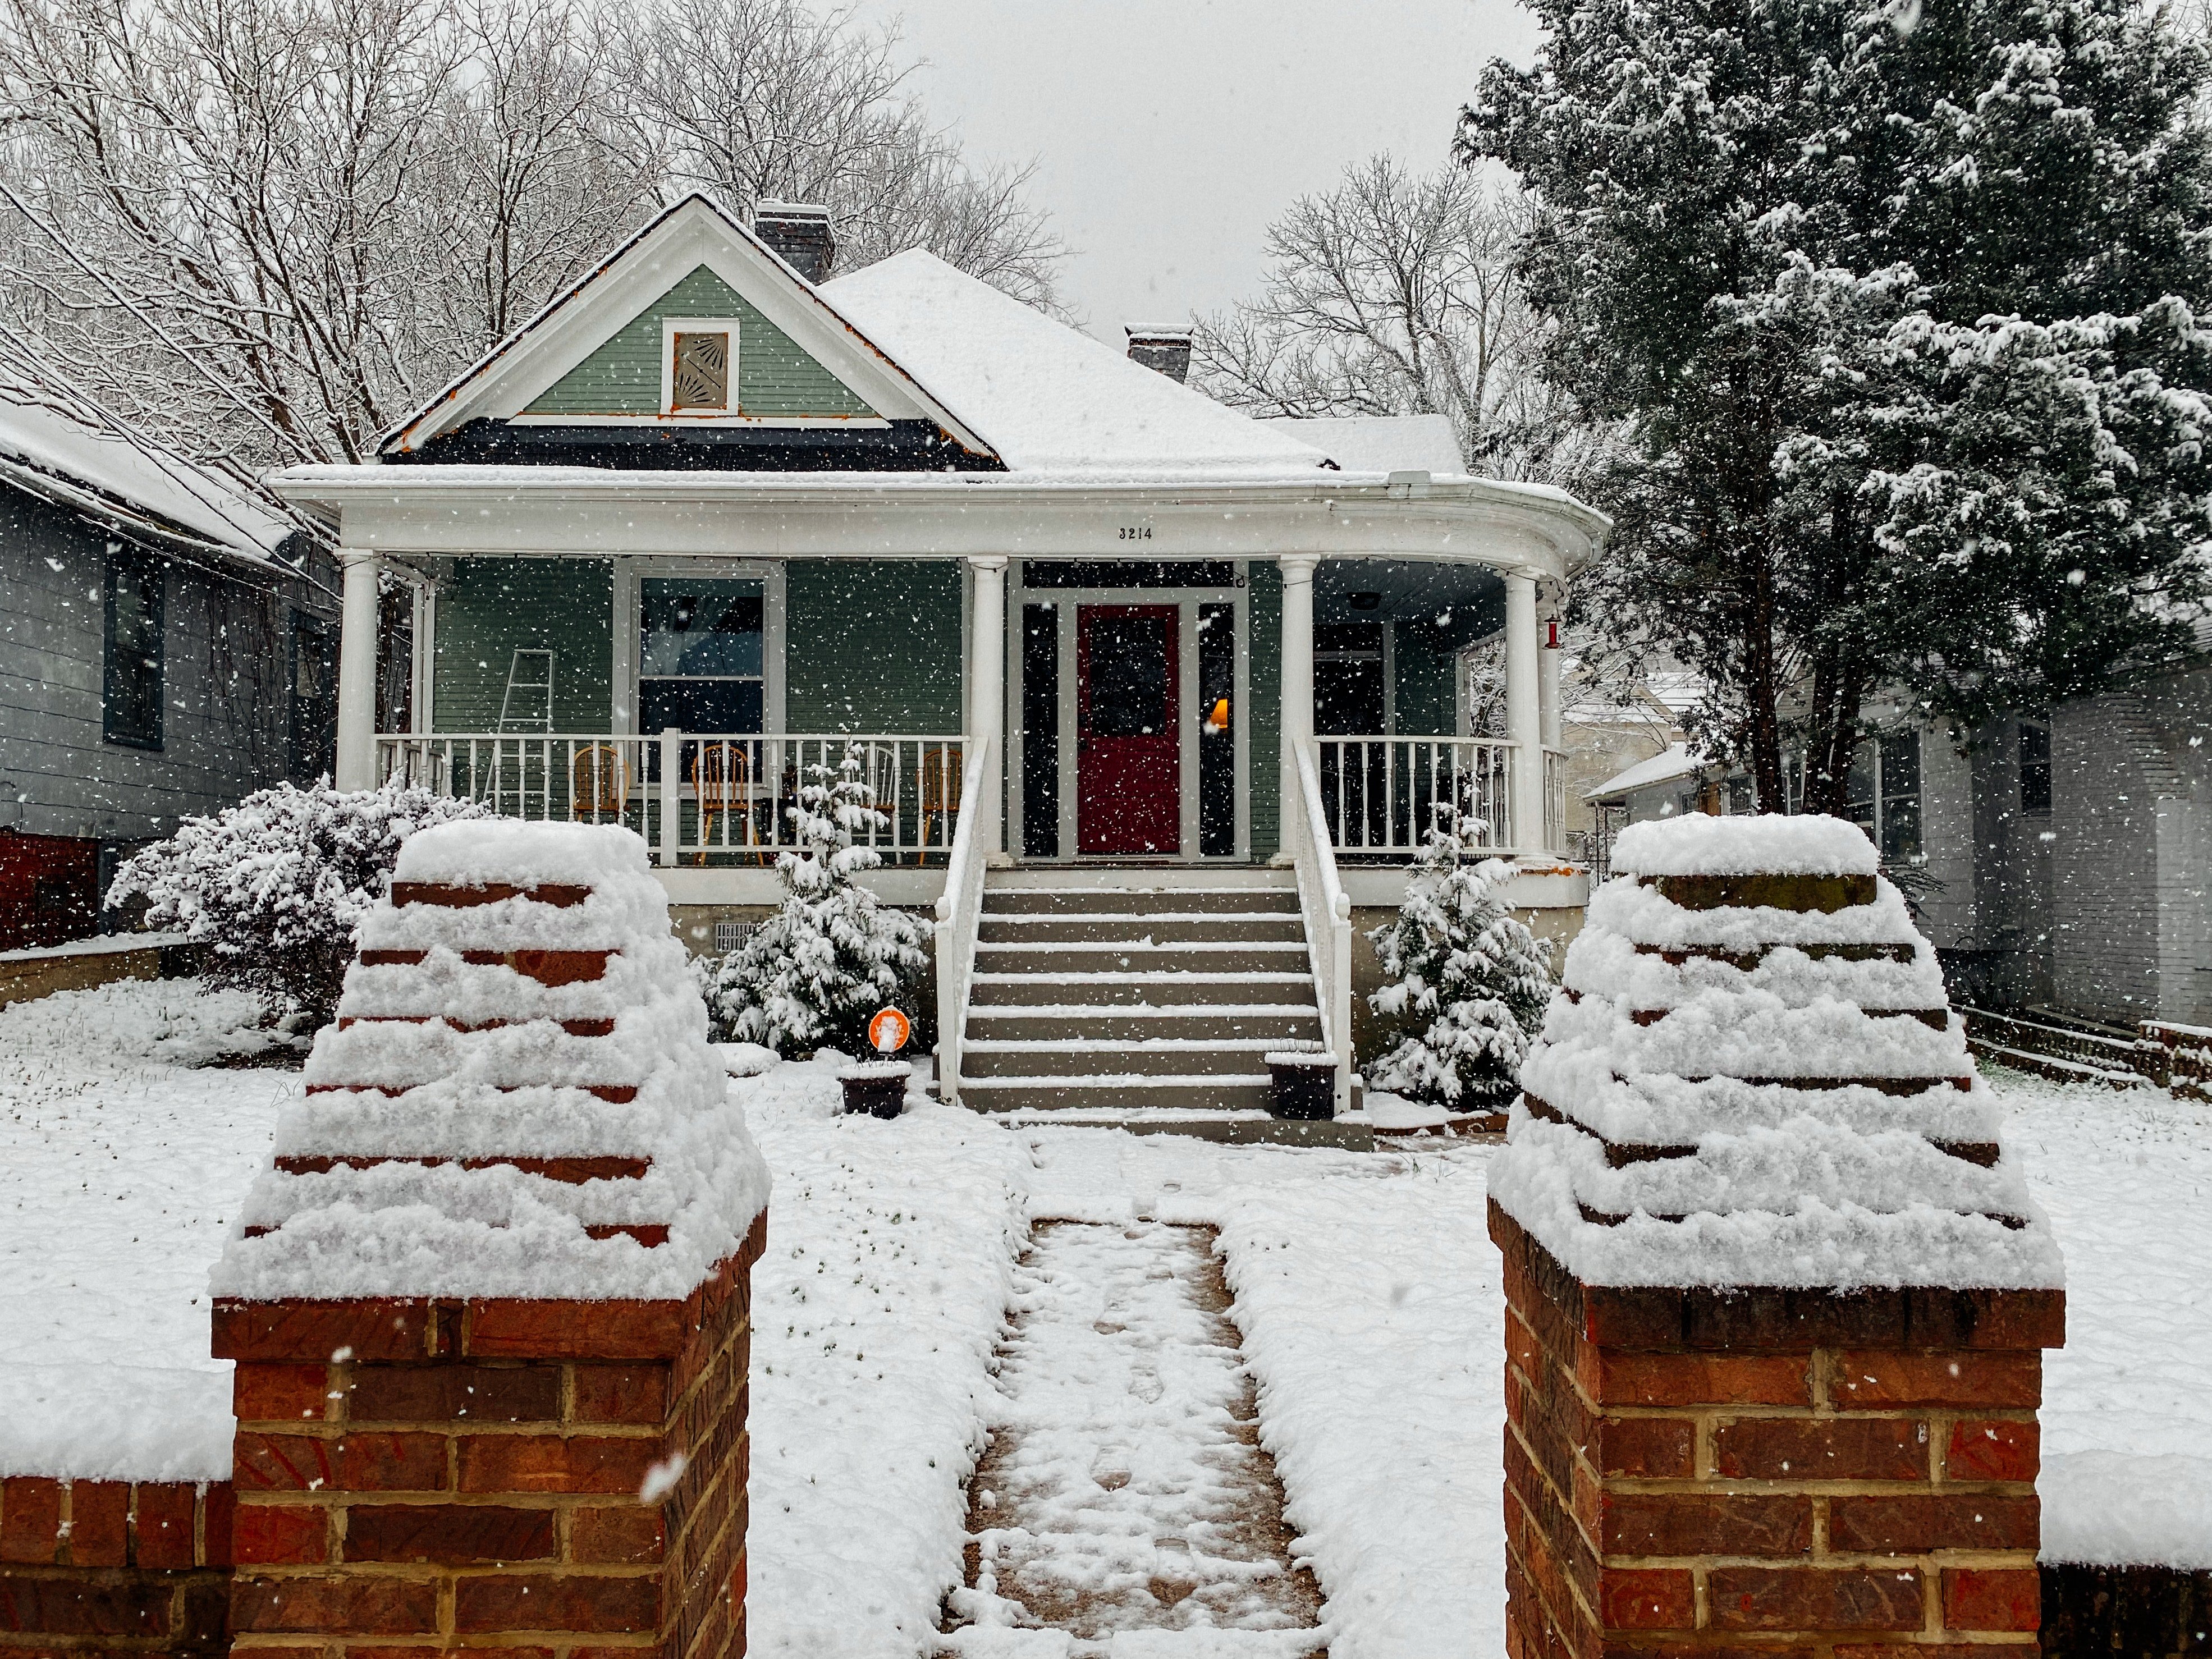 While the boy's house was okay, his neighbor's house ended up covered in snow. | Source: Pexels